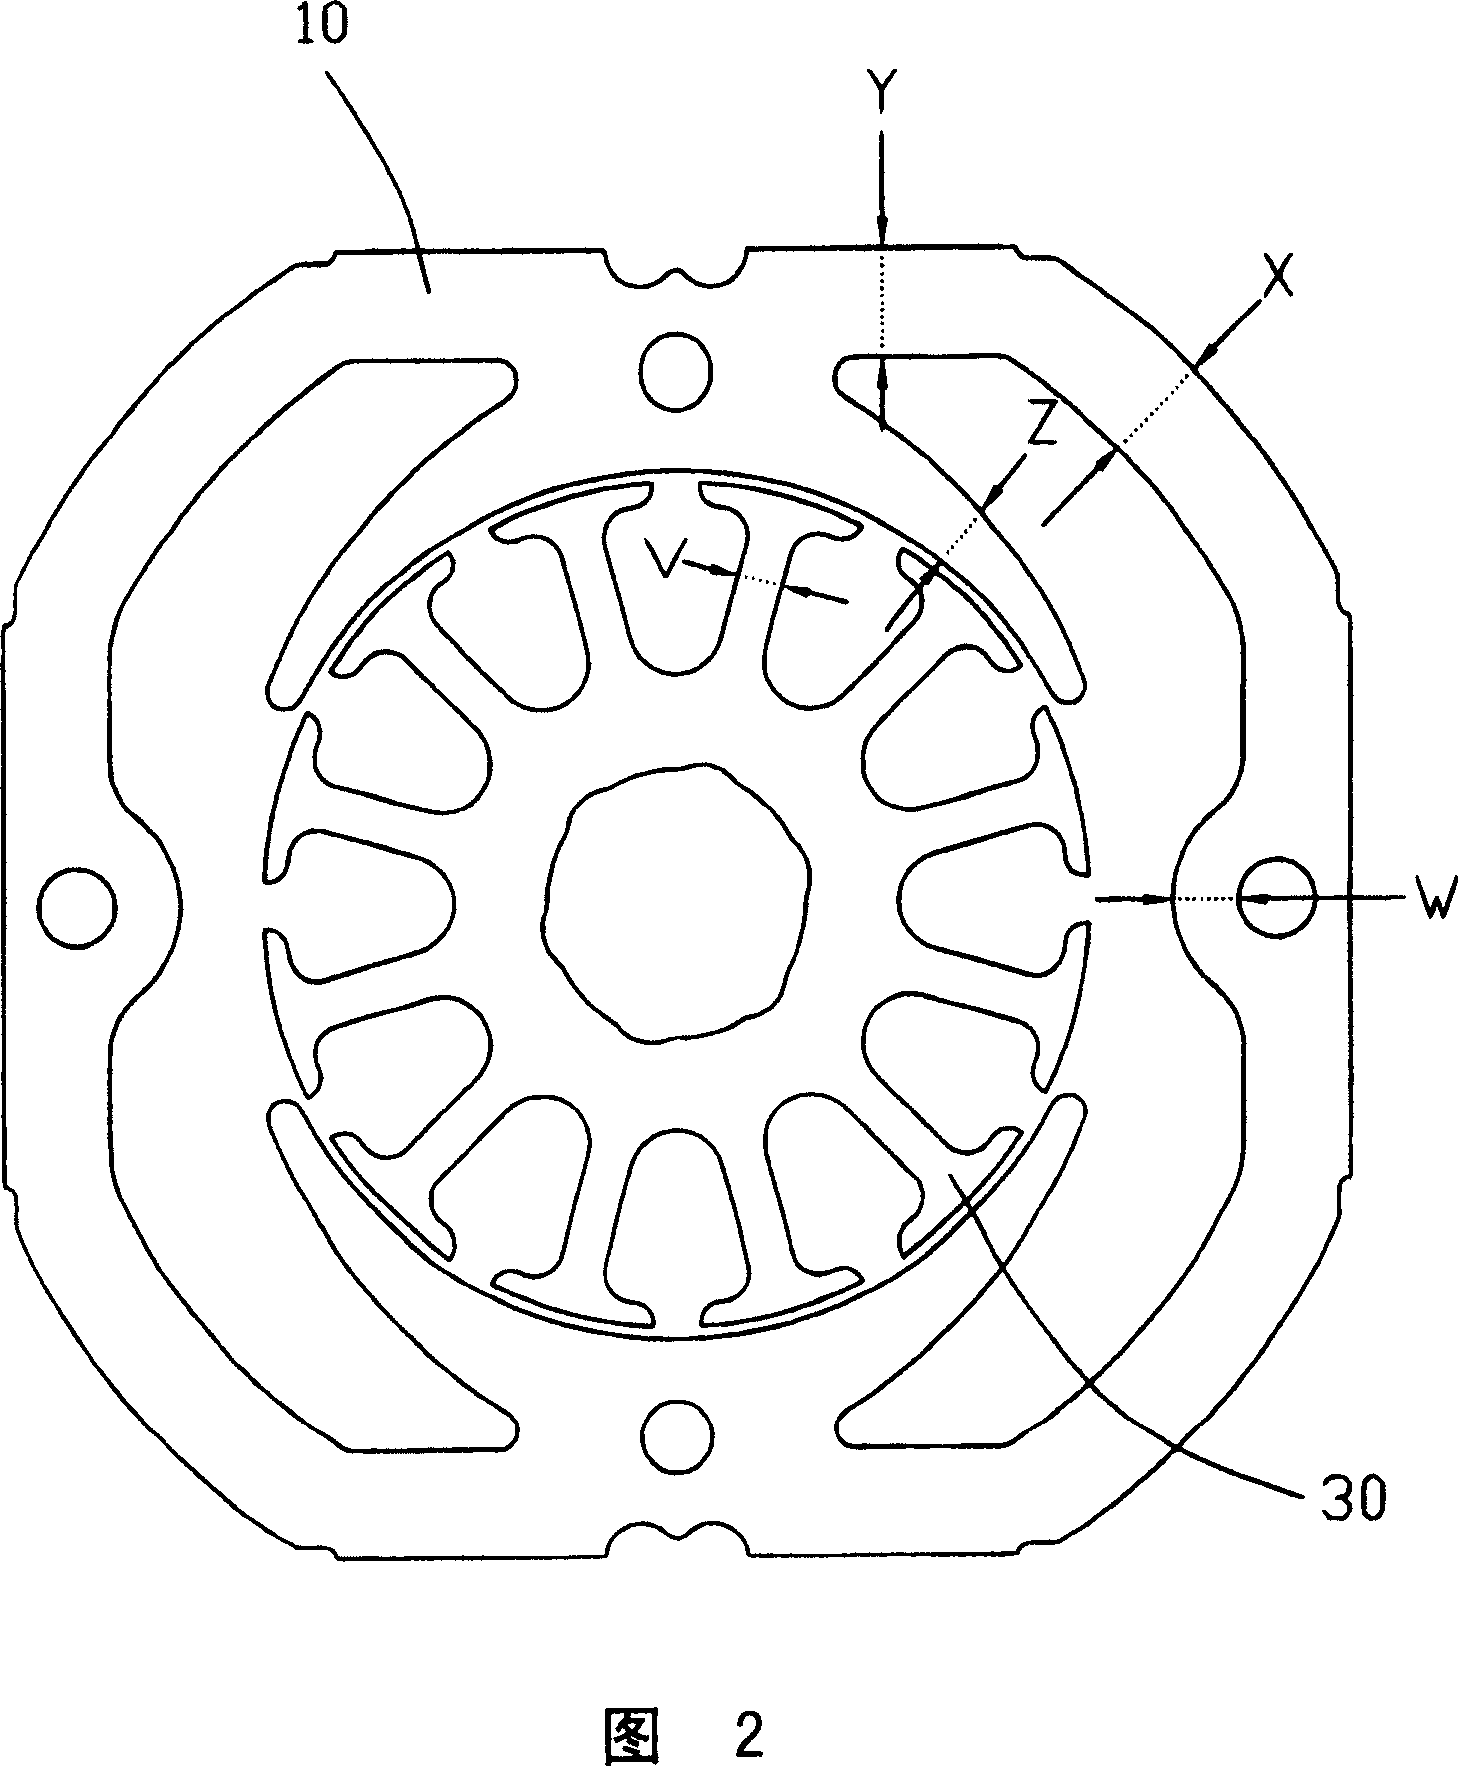 General motor and its stator lamination